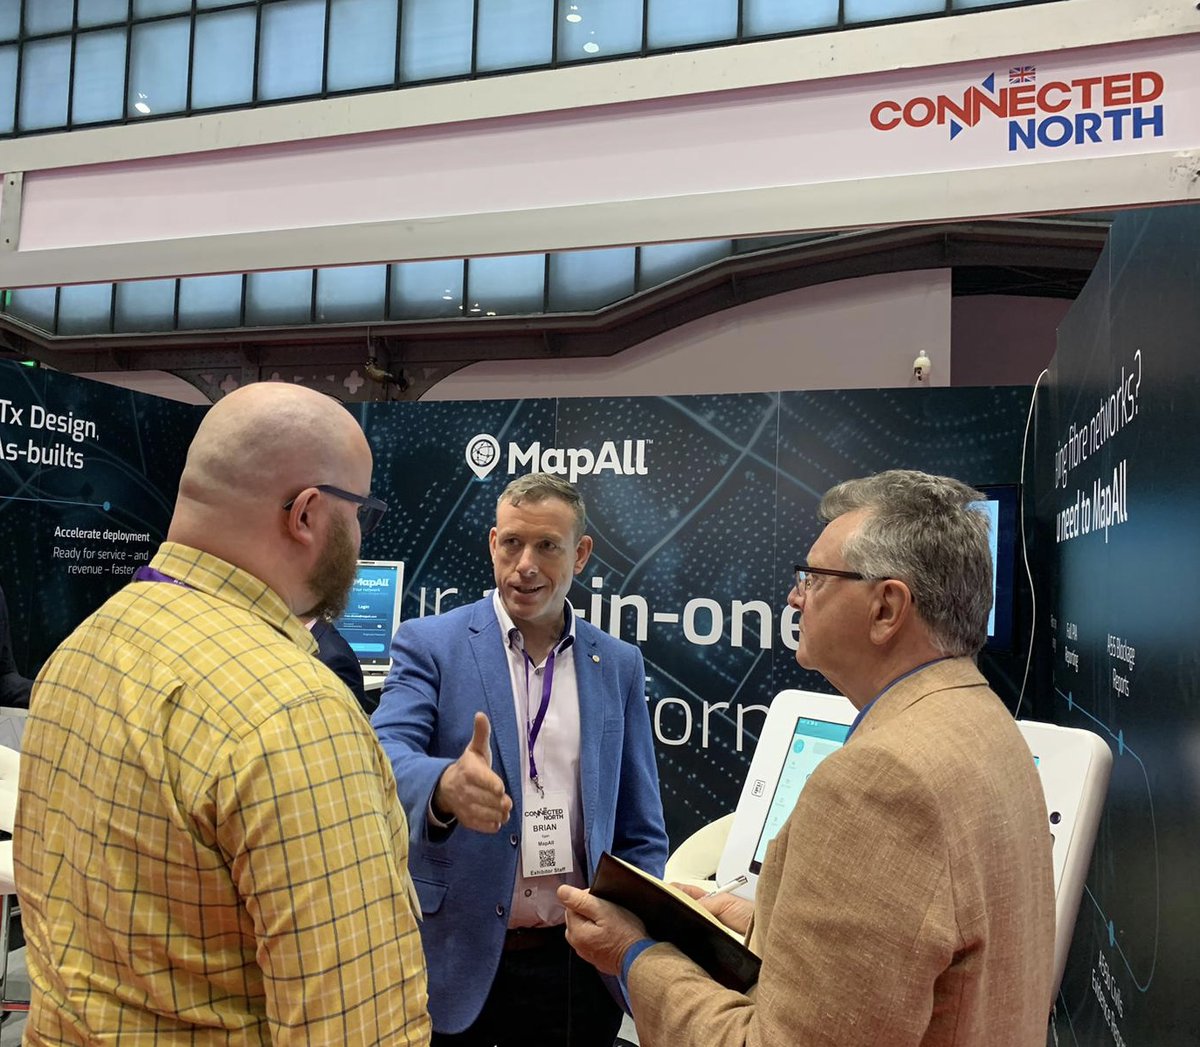 It's the end of an incredible two-day event here at #ConnectedNorth ✔️ Thanks to our partners, prospects, customers and everyone who joined our Build 2.0 live demos. We're already looking forward to the next one, hope to see you there! 🌍